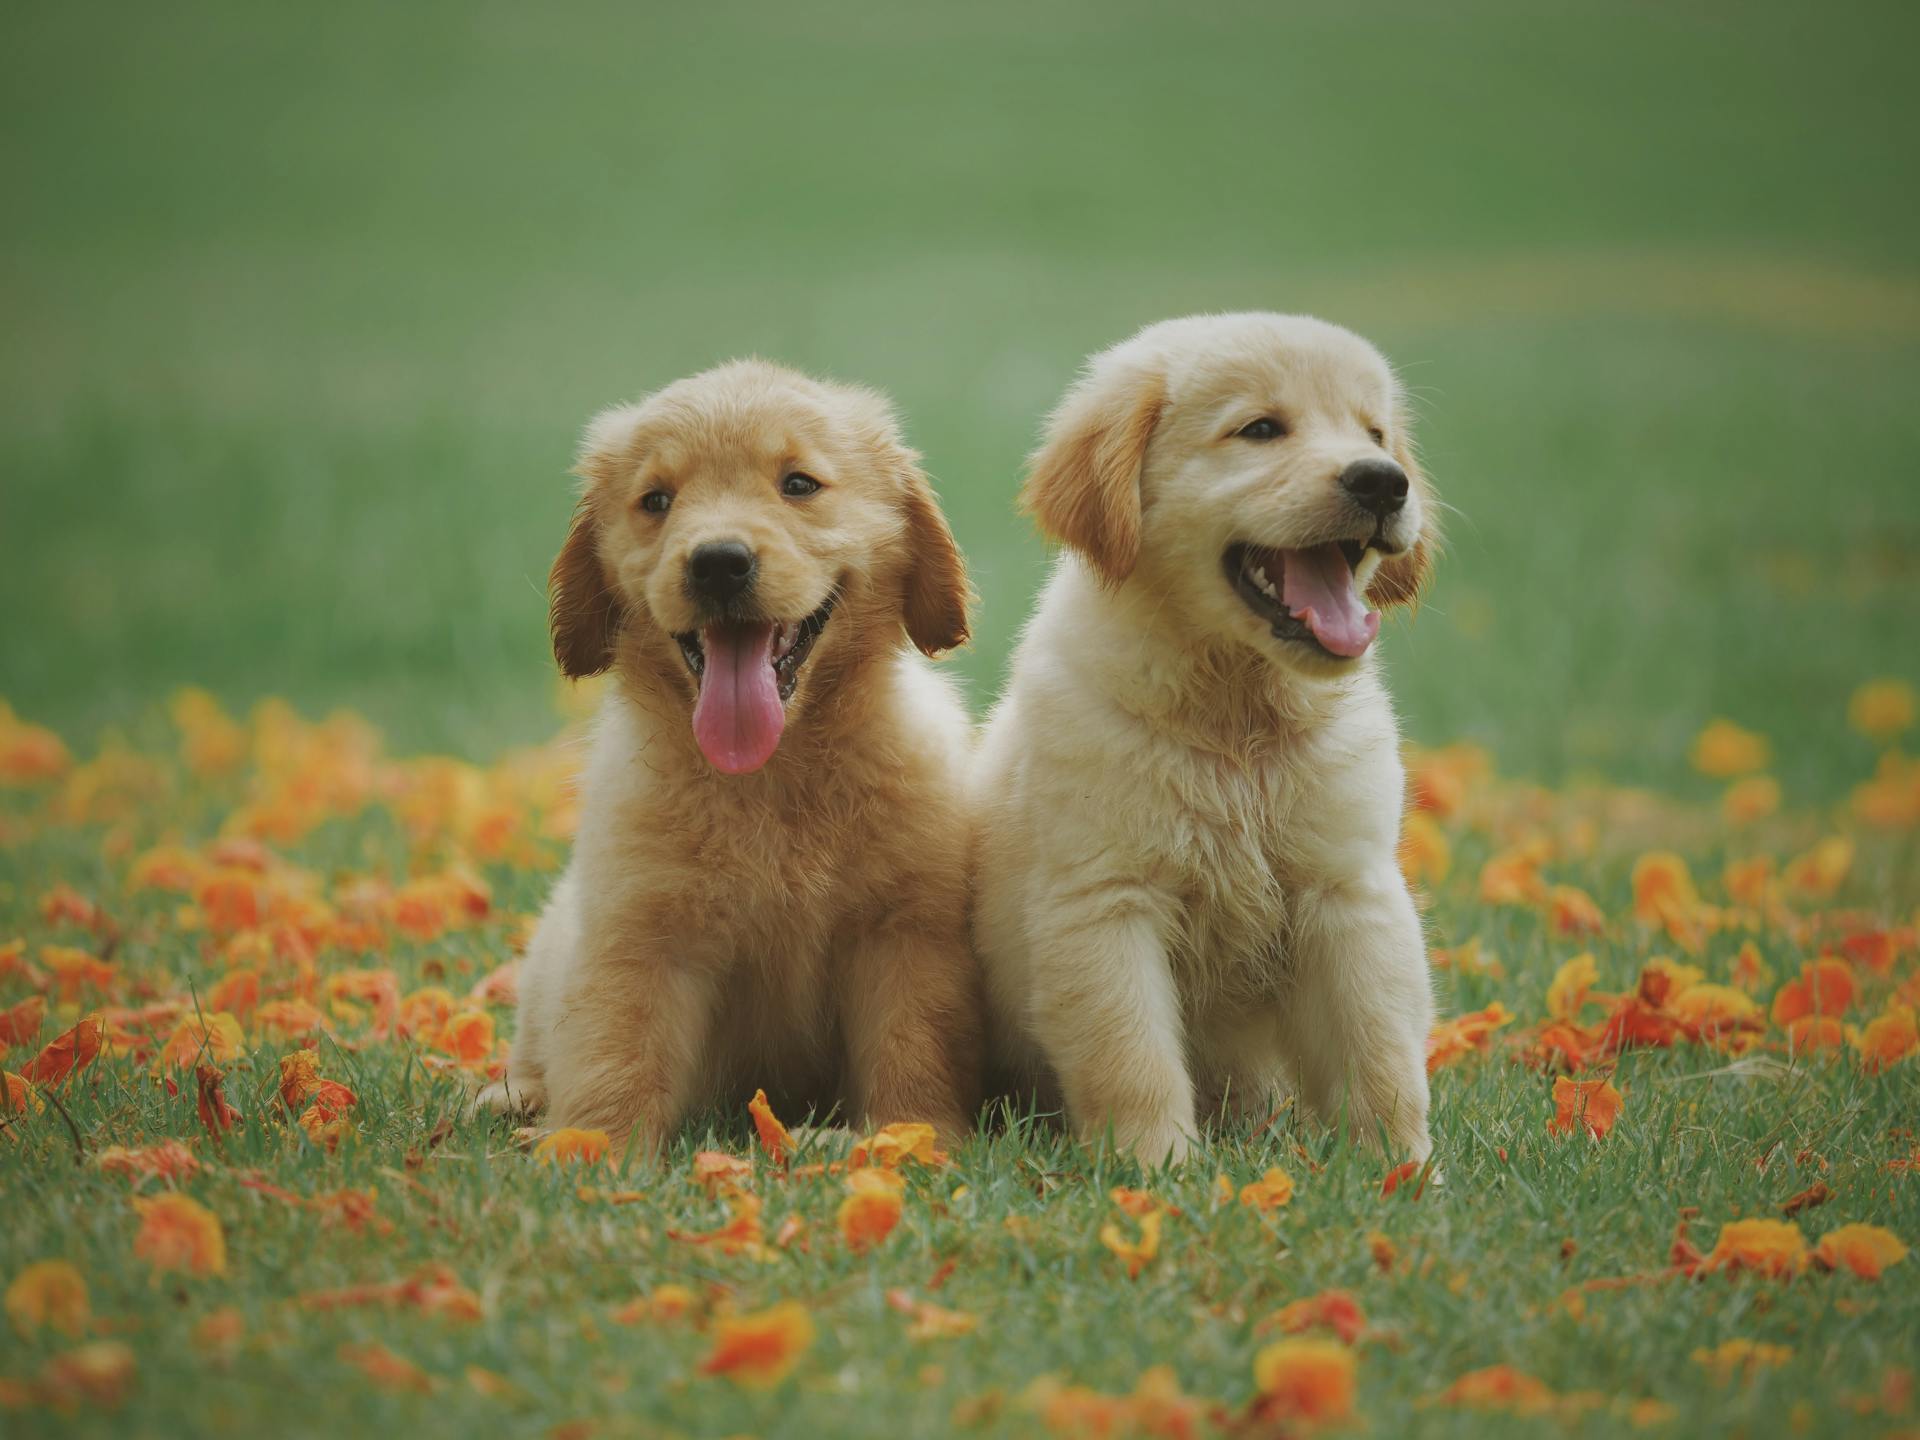 Two puppies sitting on the grass | Source: Pexels